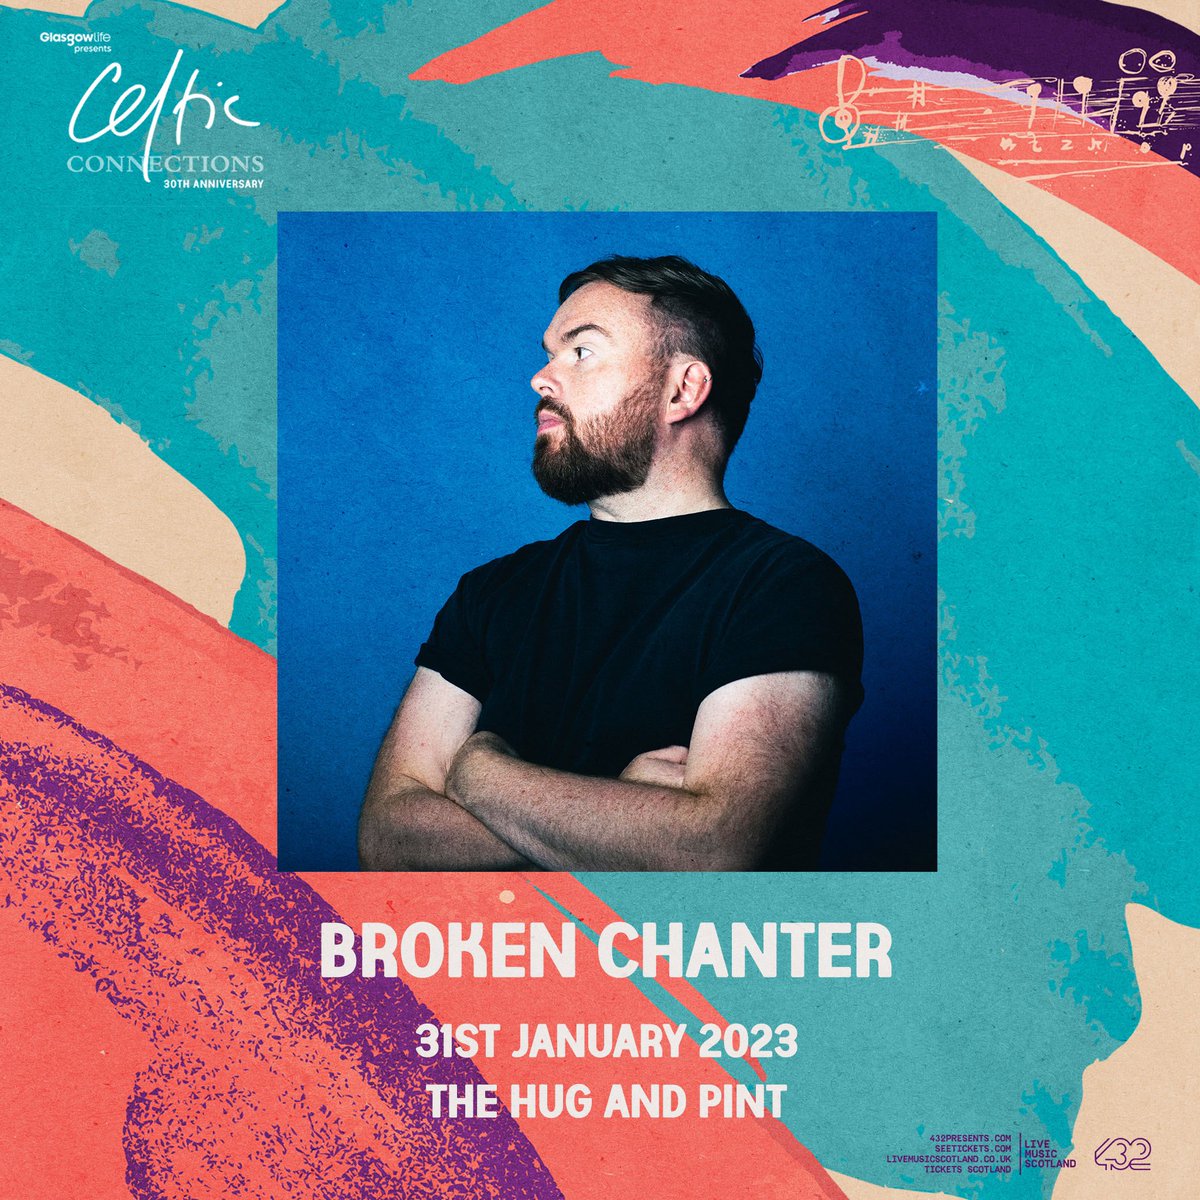 have you got your tickets for my @ccfest show at @thehugandpint yet? best not hang about, if no 👇 brokenchanter.com/tour a FULL BAND show. an evening of mighty craic awaits.